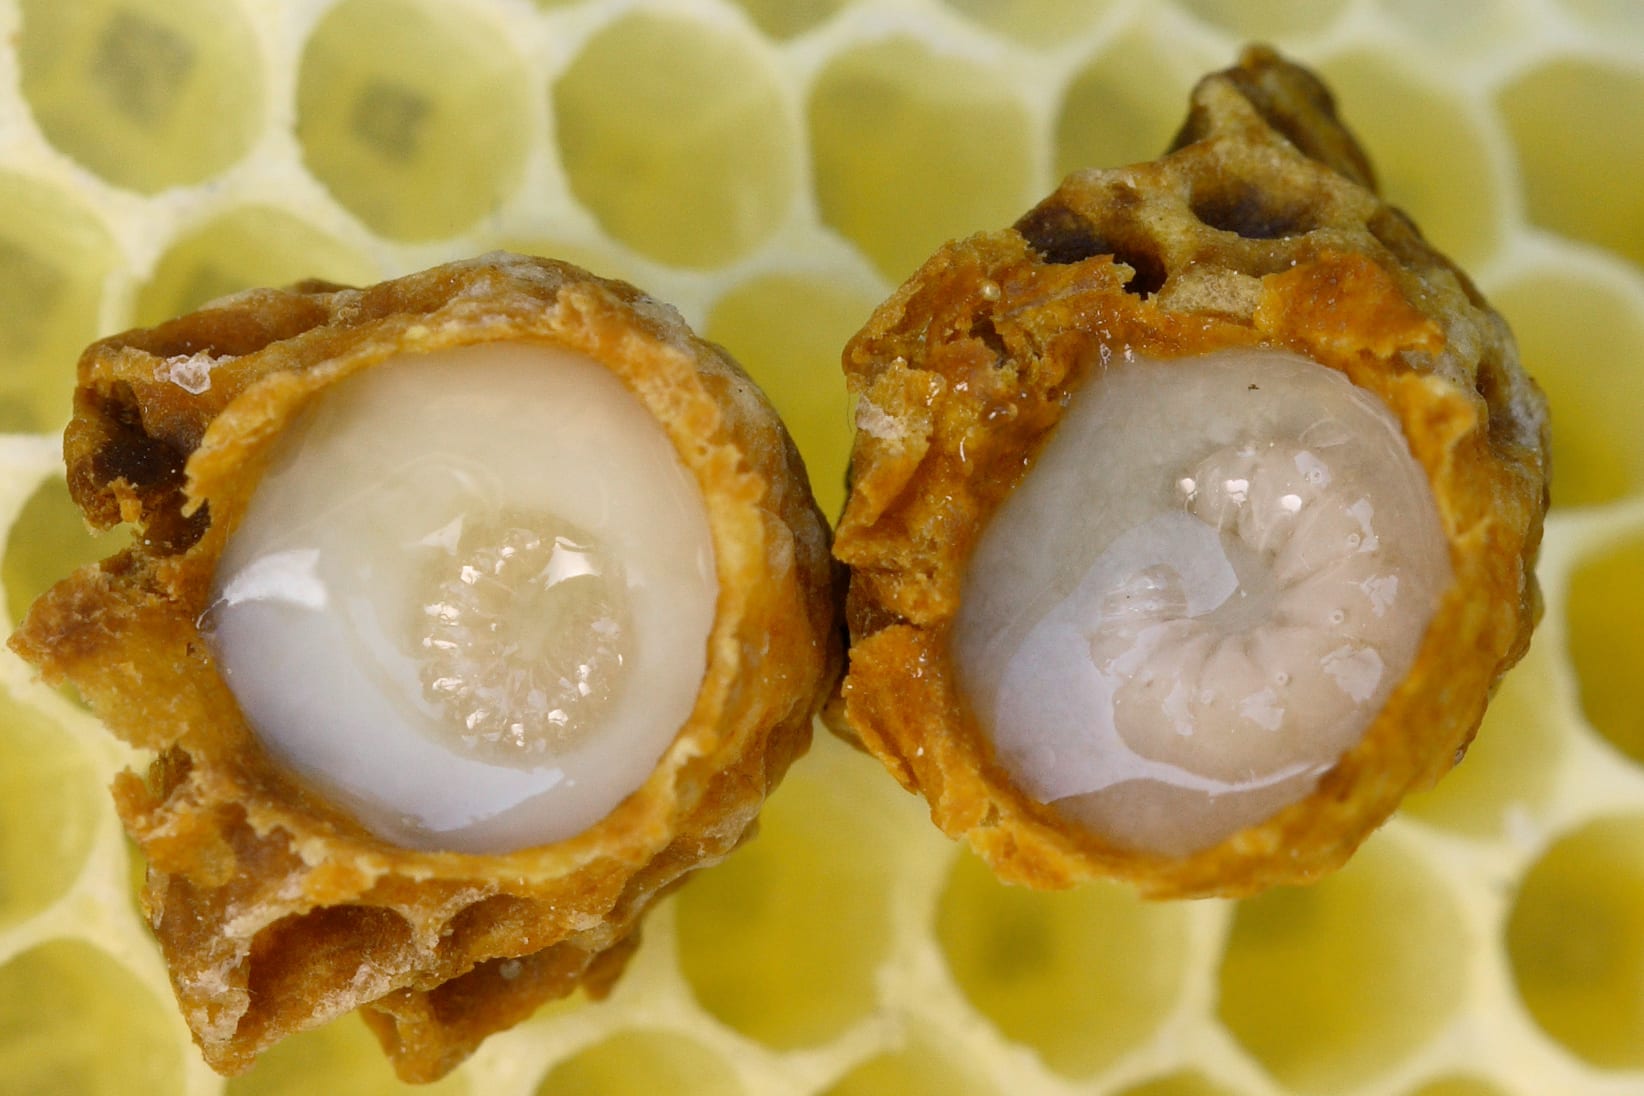 How Does Royal Jelly Make a Queen Bee?